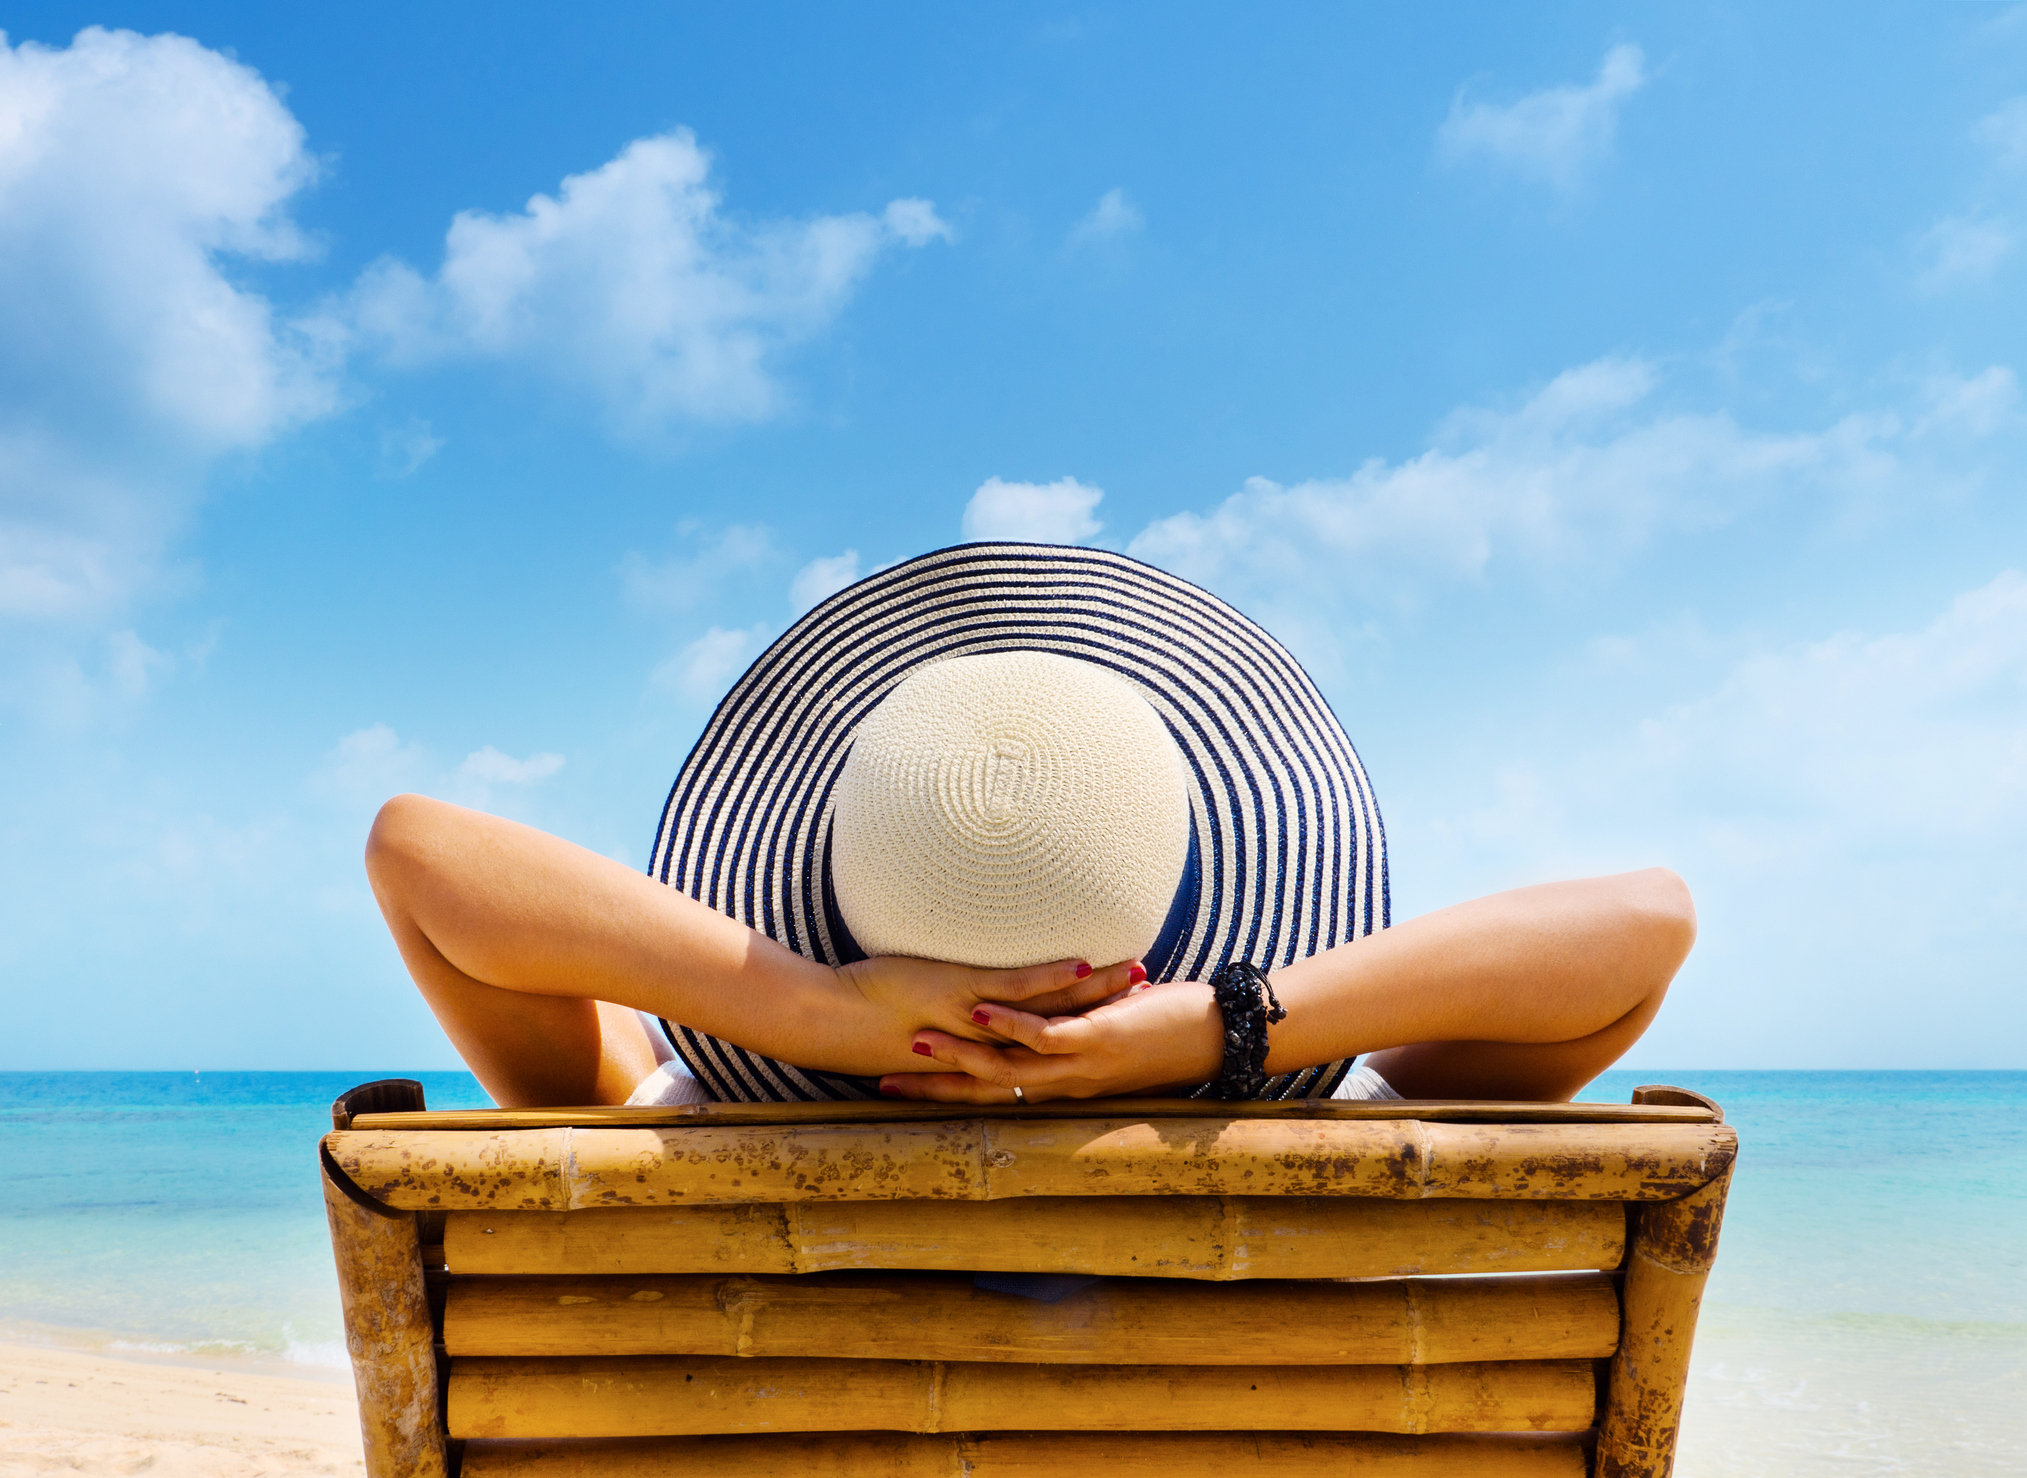 Woman in beach chair preventing sun damage with sunscreen